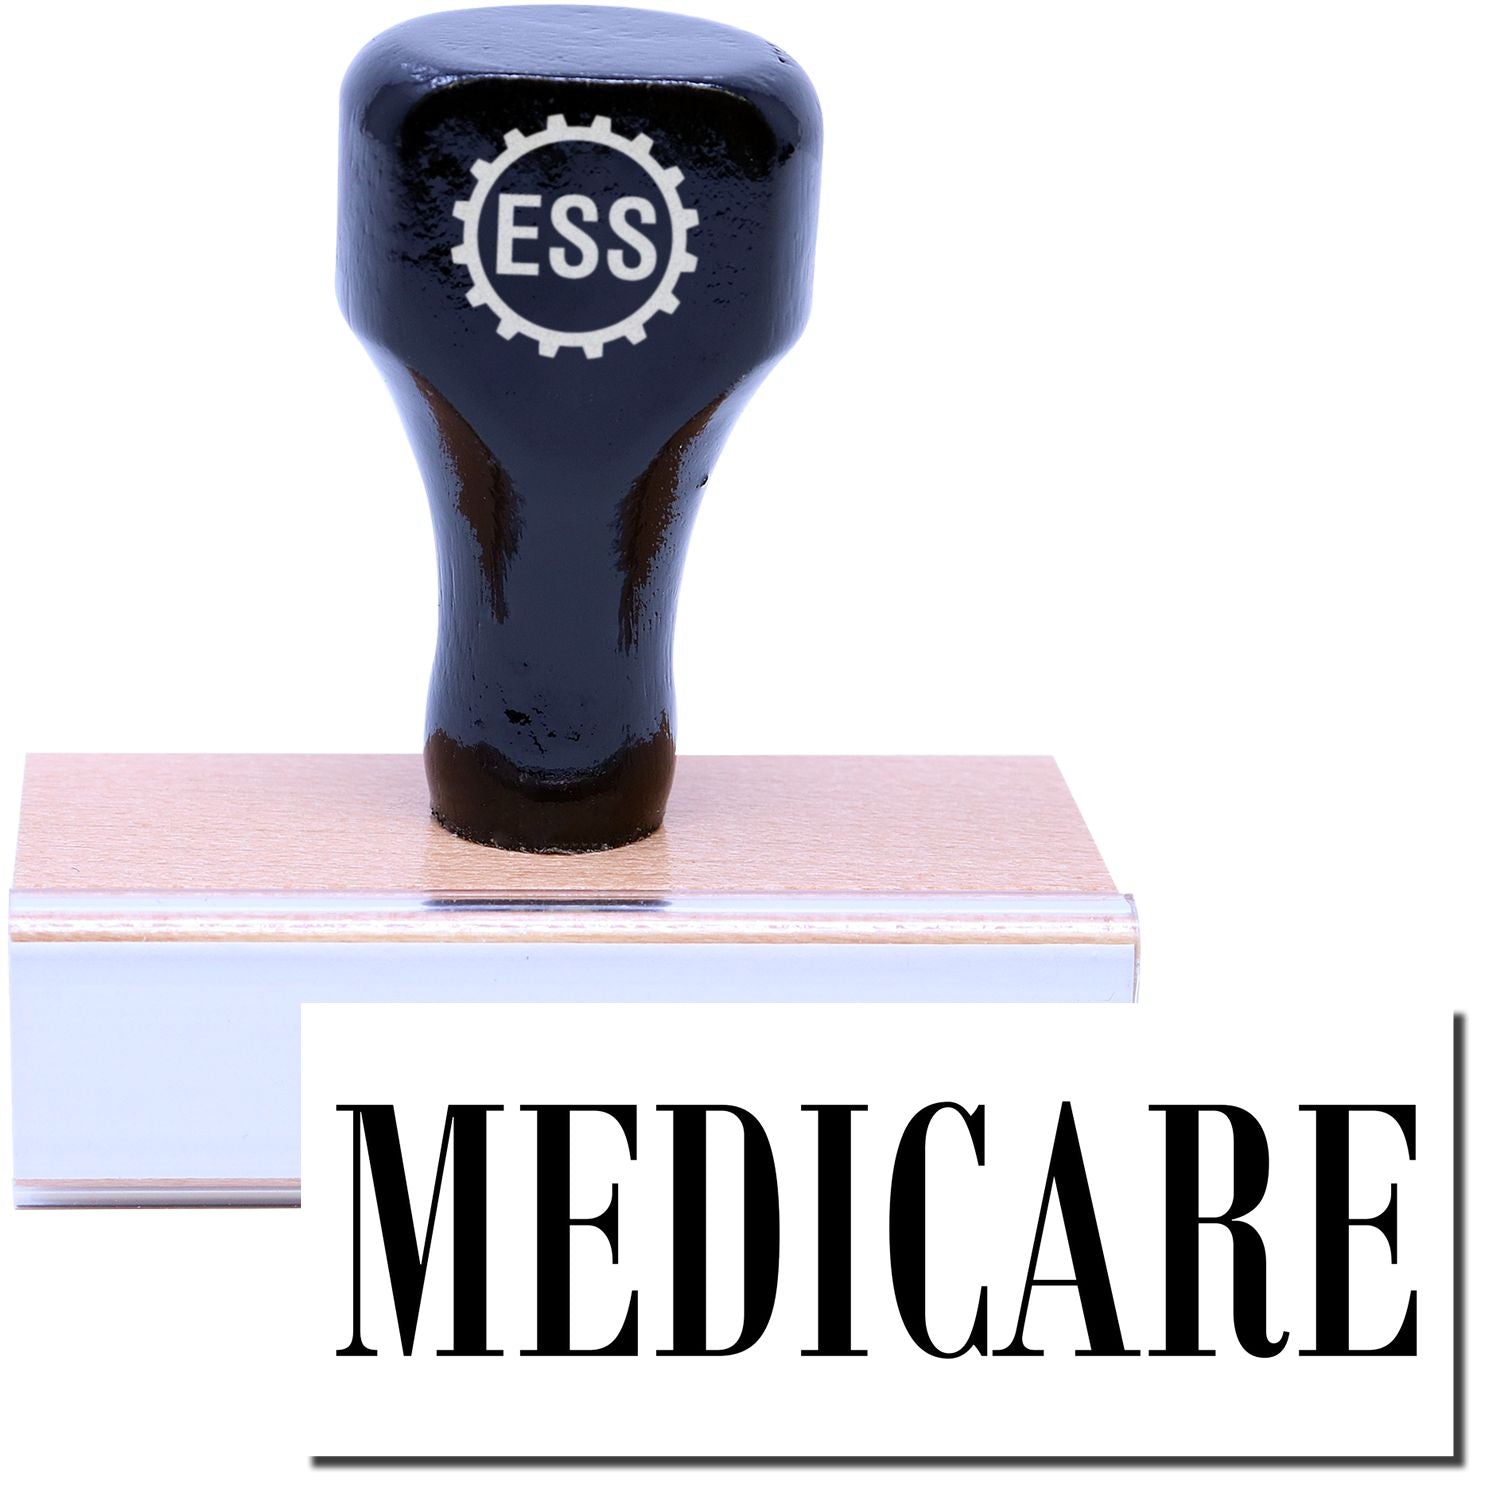 A stock office rubber stamp with a stamped image showing how the text "MEDICARE" in a large font is displayed after stamping.